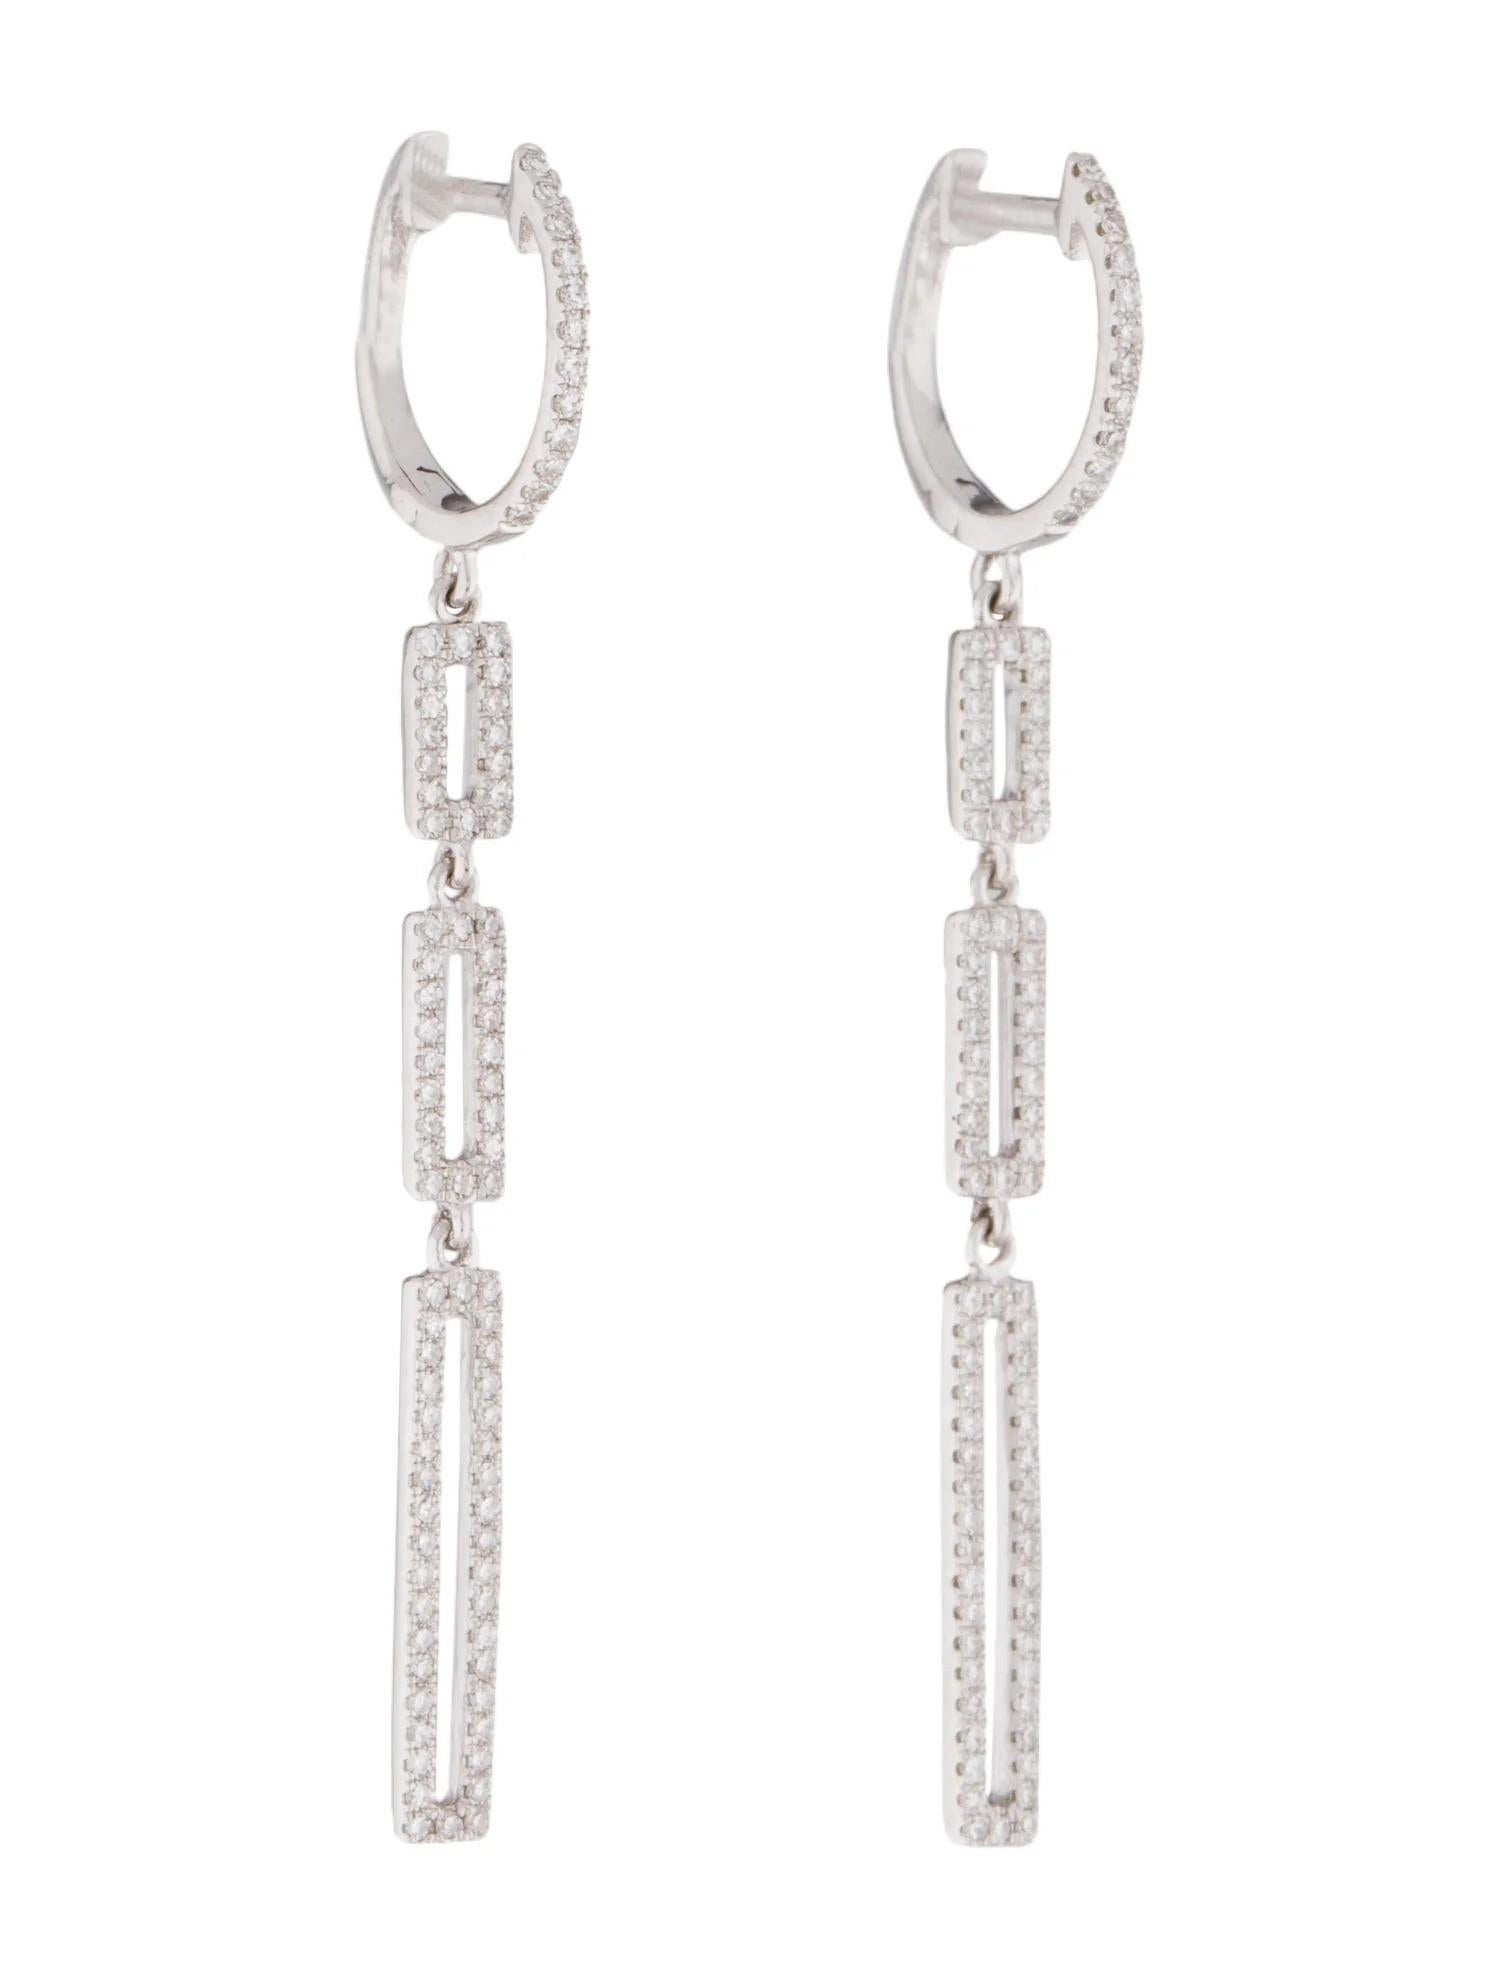 0.41 Carat Diamond Drop Link White Gold Earrings  In New Condition For Sale In Great Neck, NY